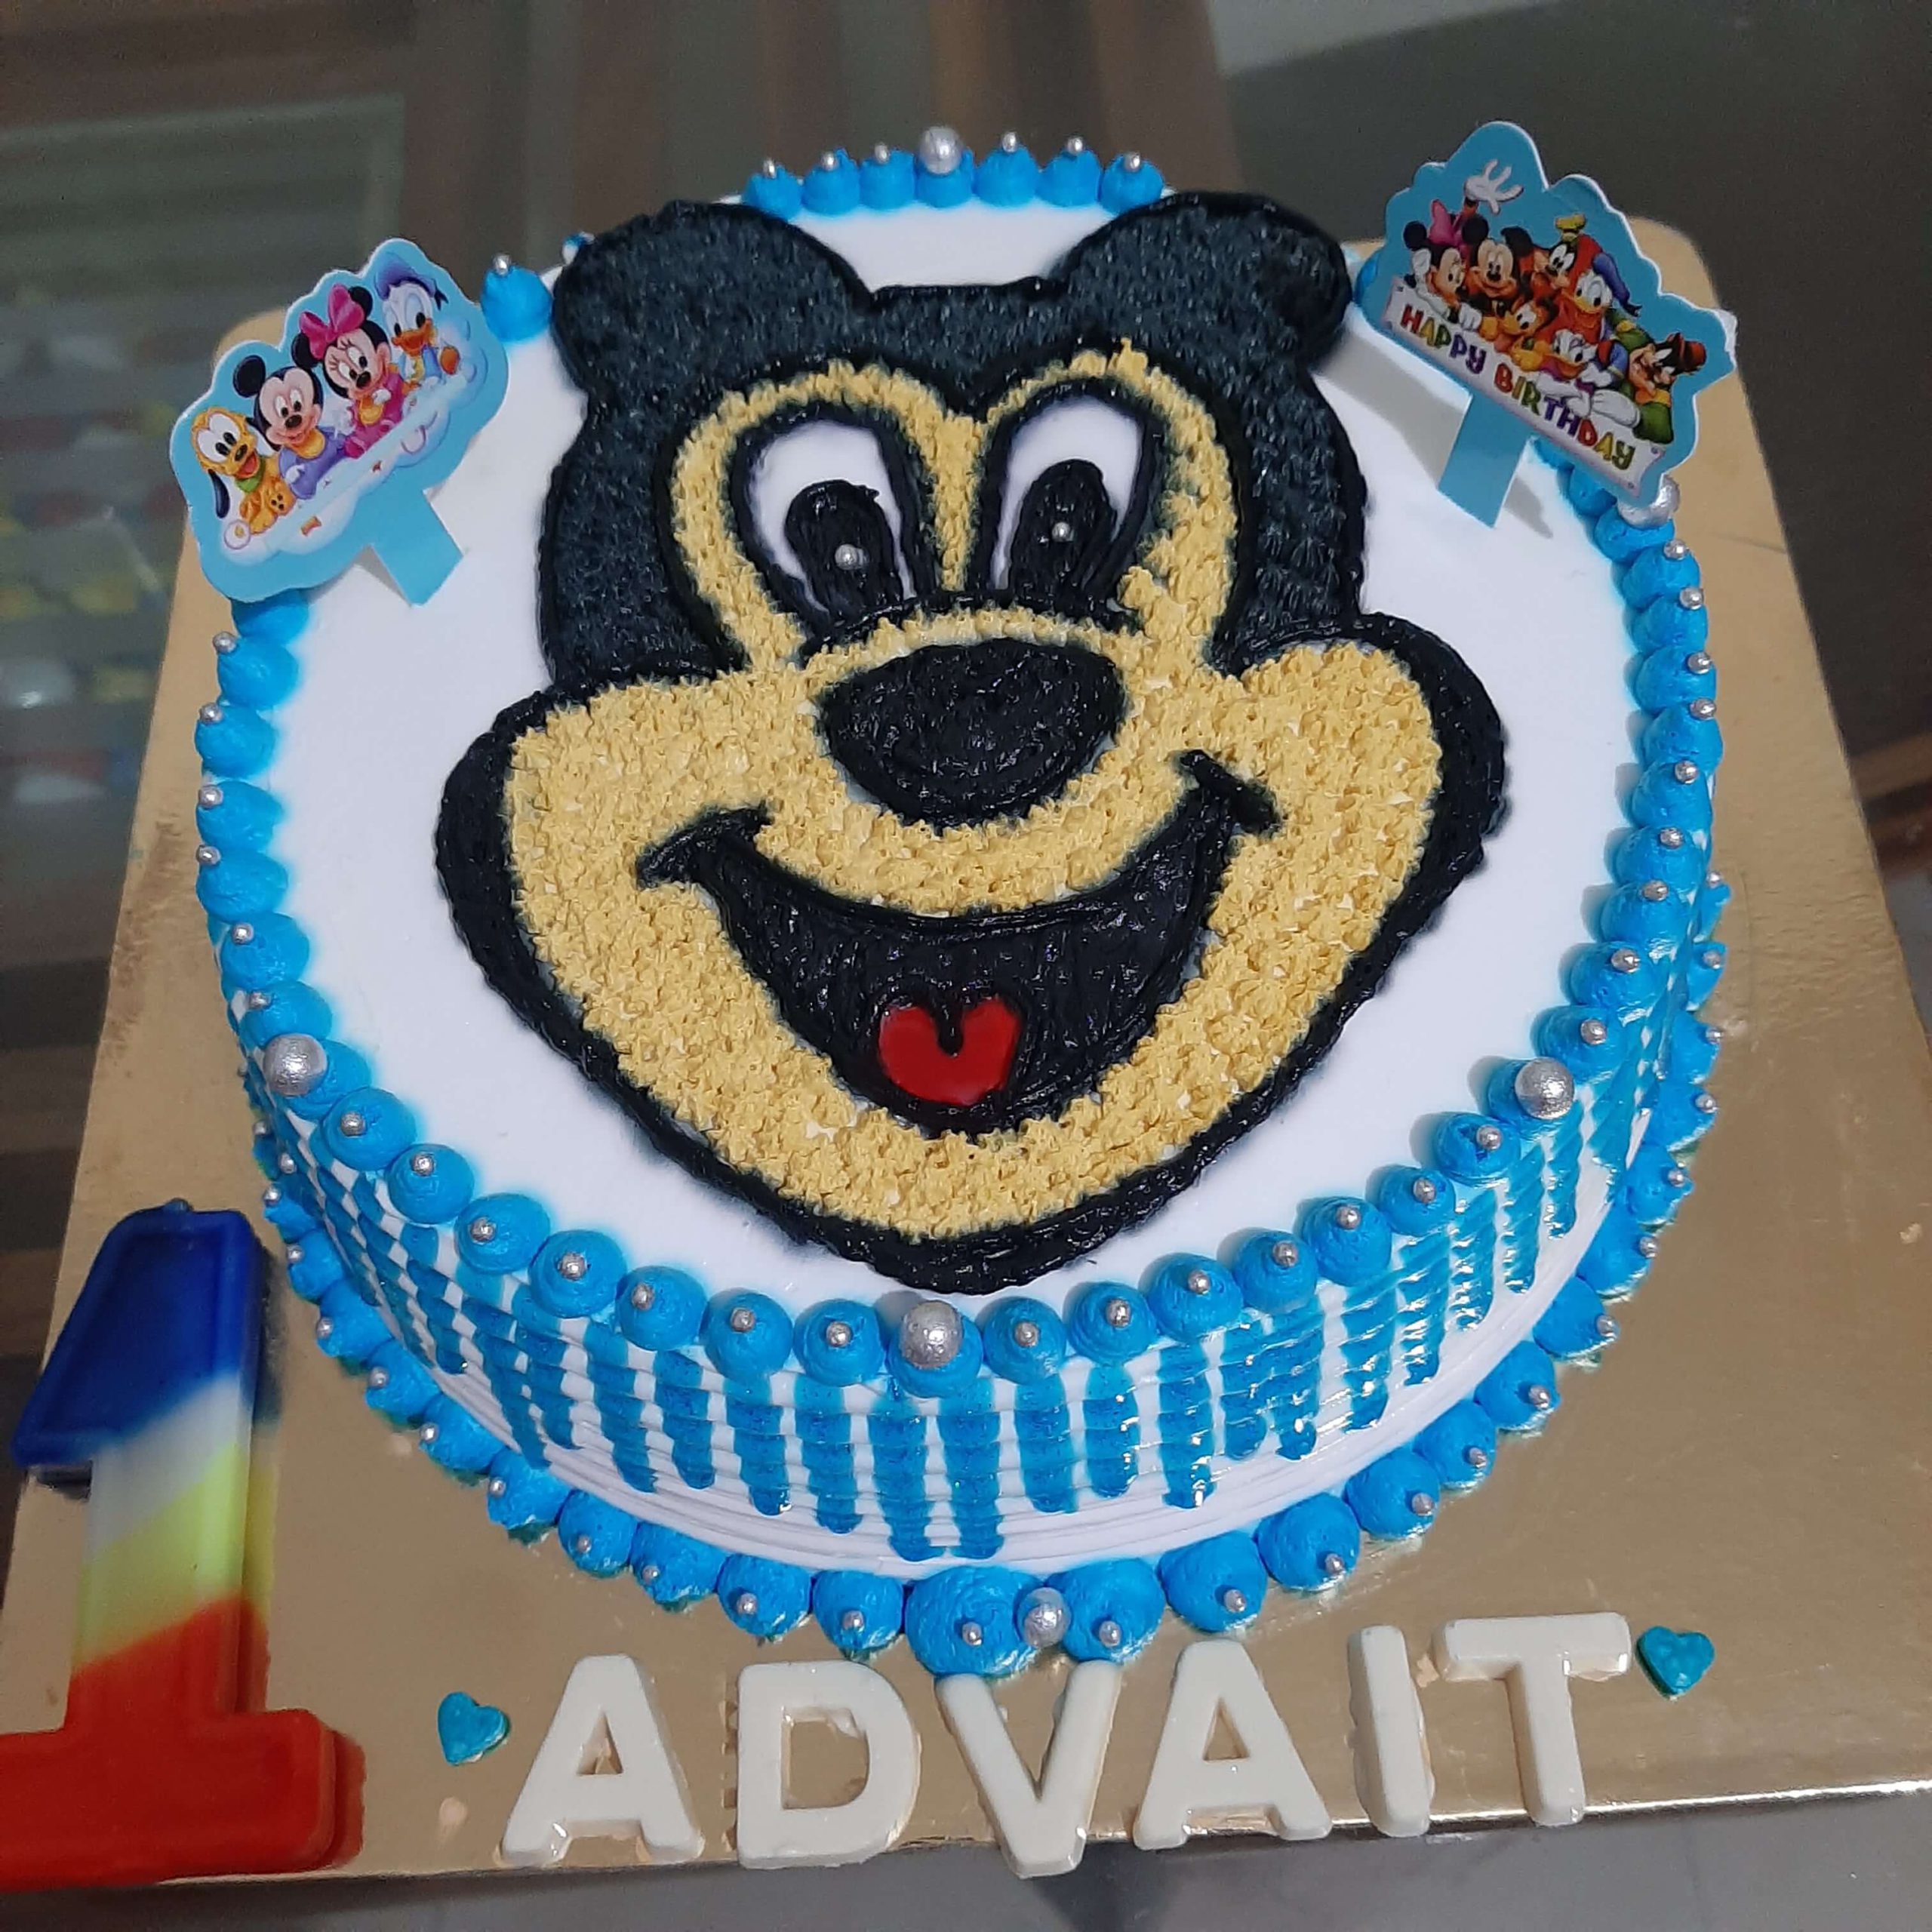 Mickey Mouse Cake Designs, Images, Price Near Me